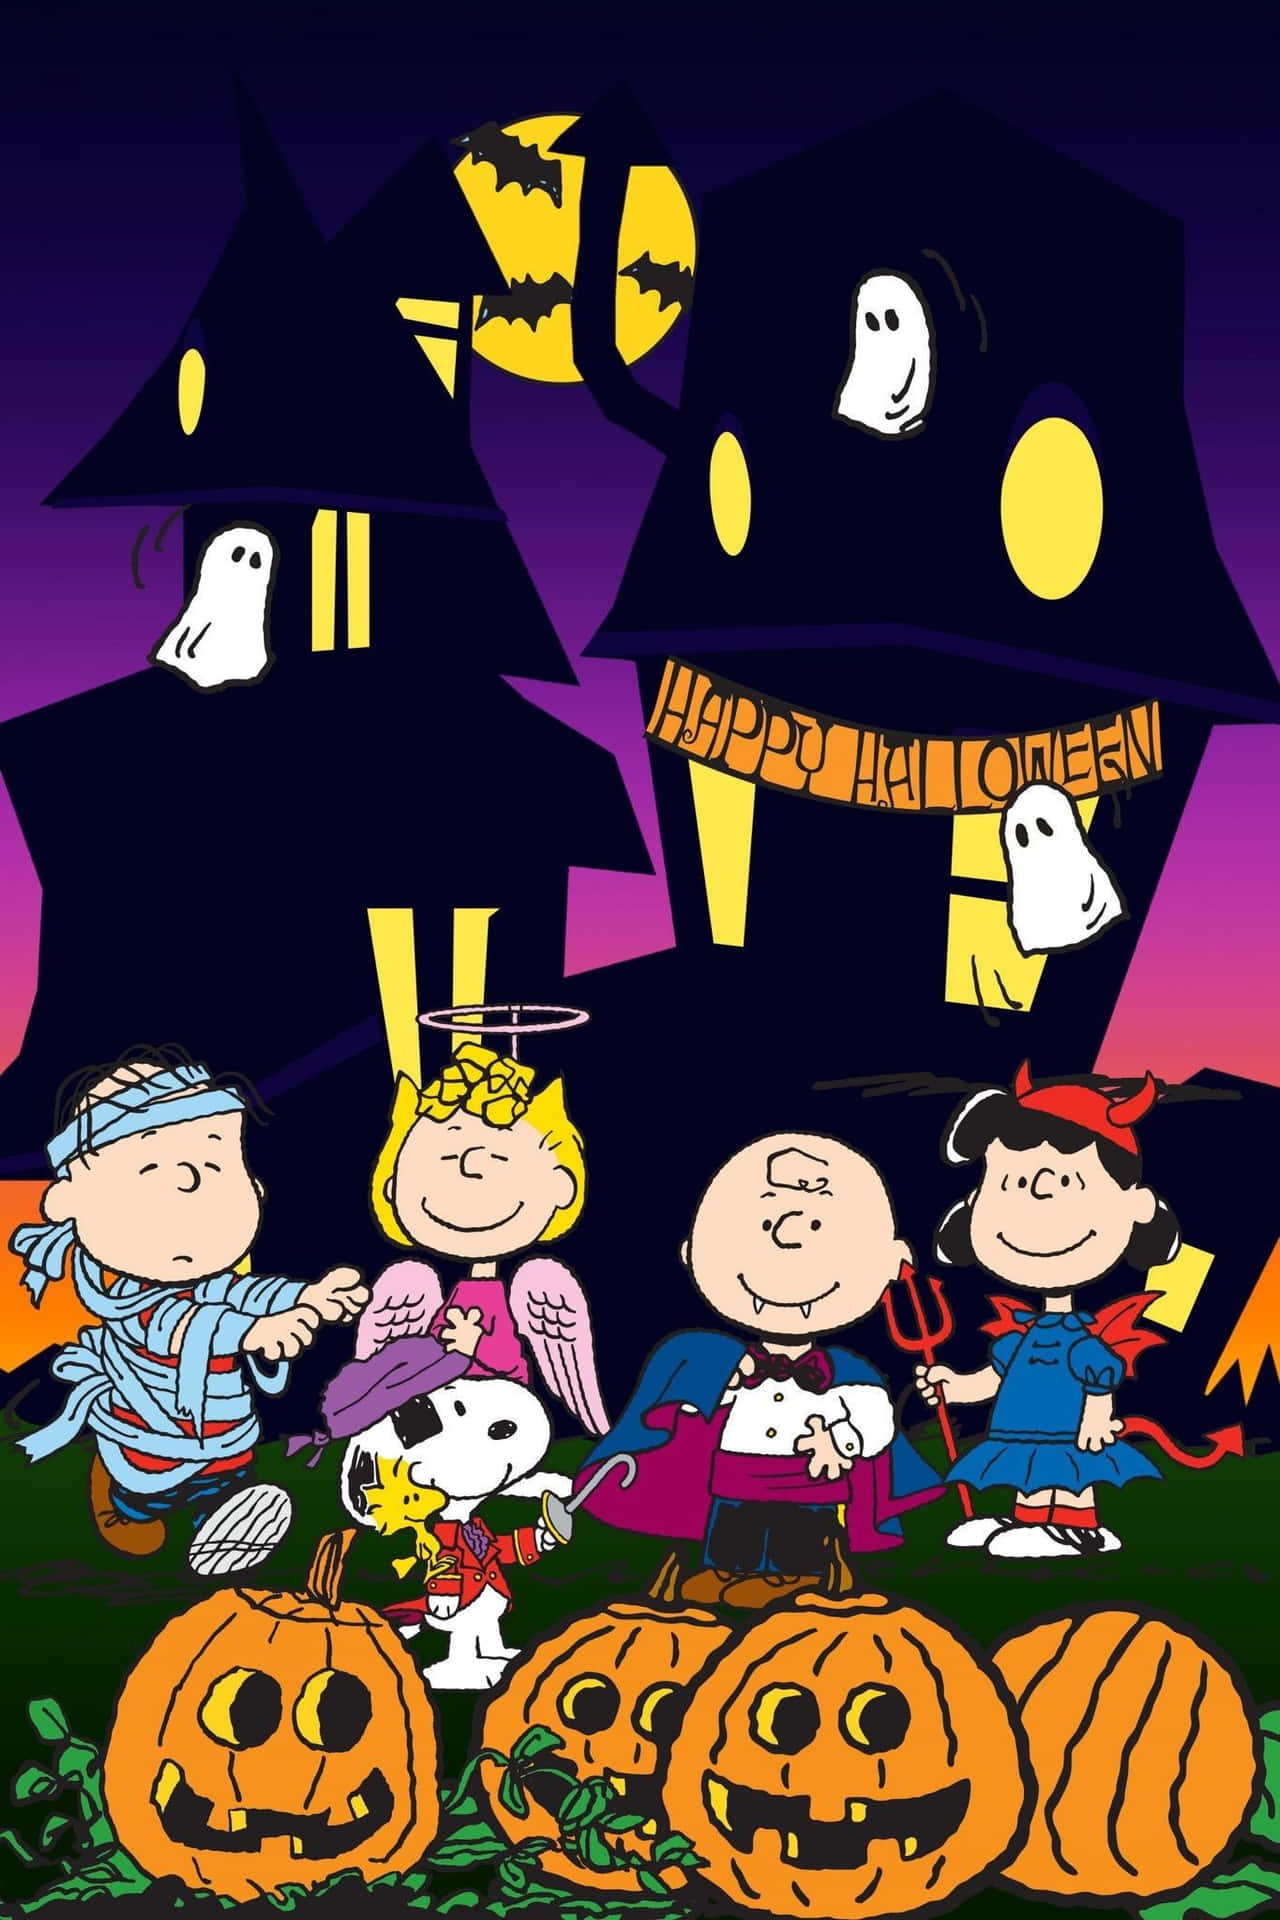 All warming up for a fun and spooky Peanuts themed Halloween! Wallpaper